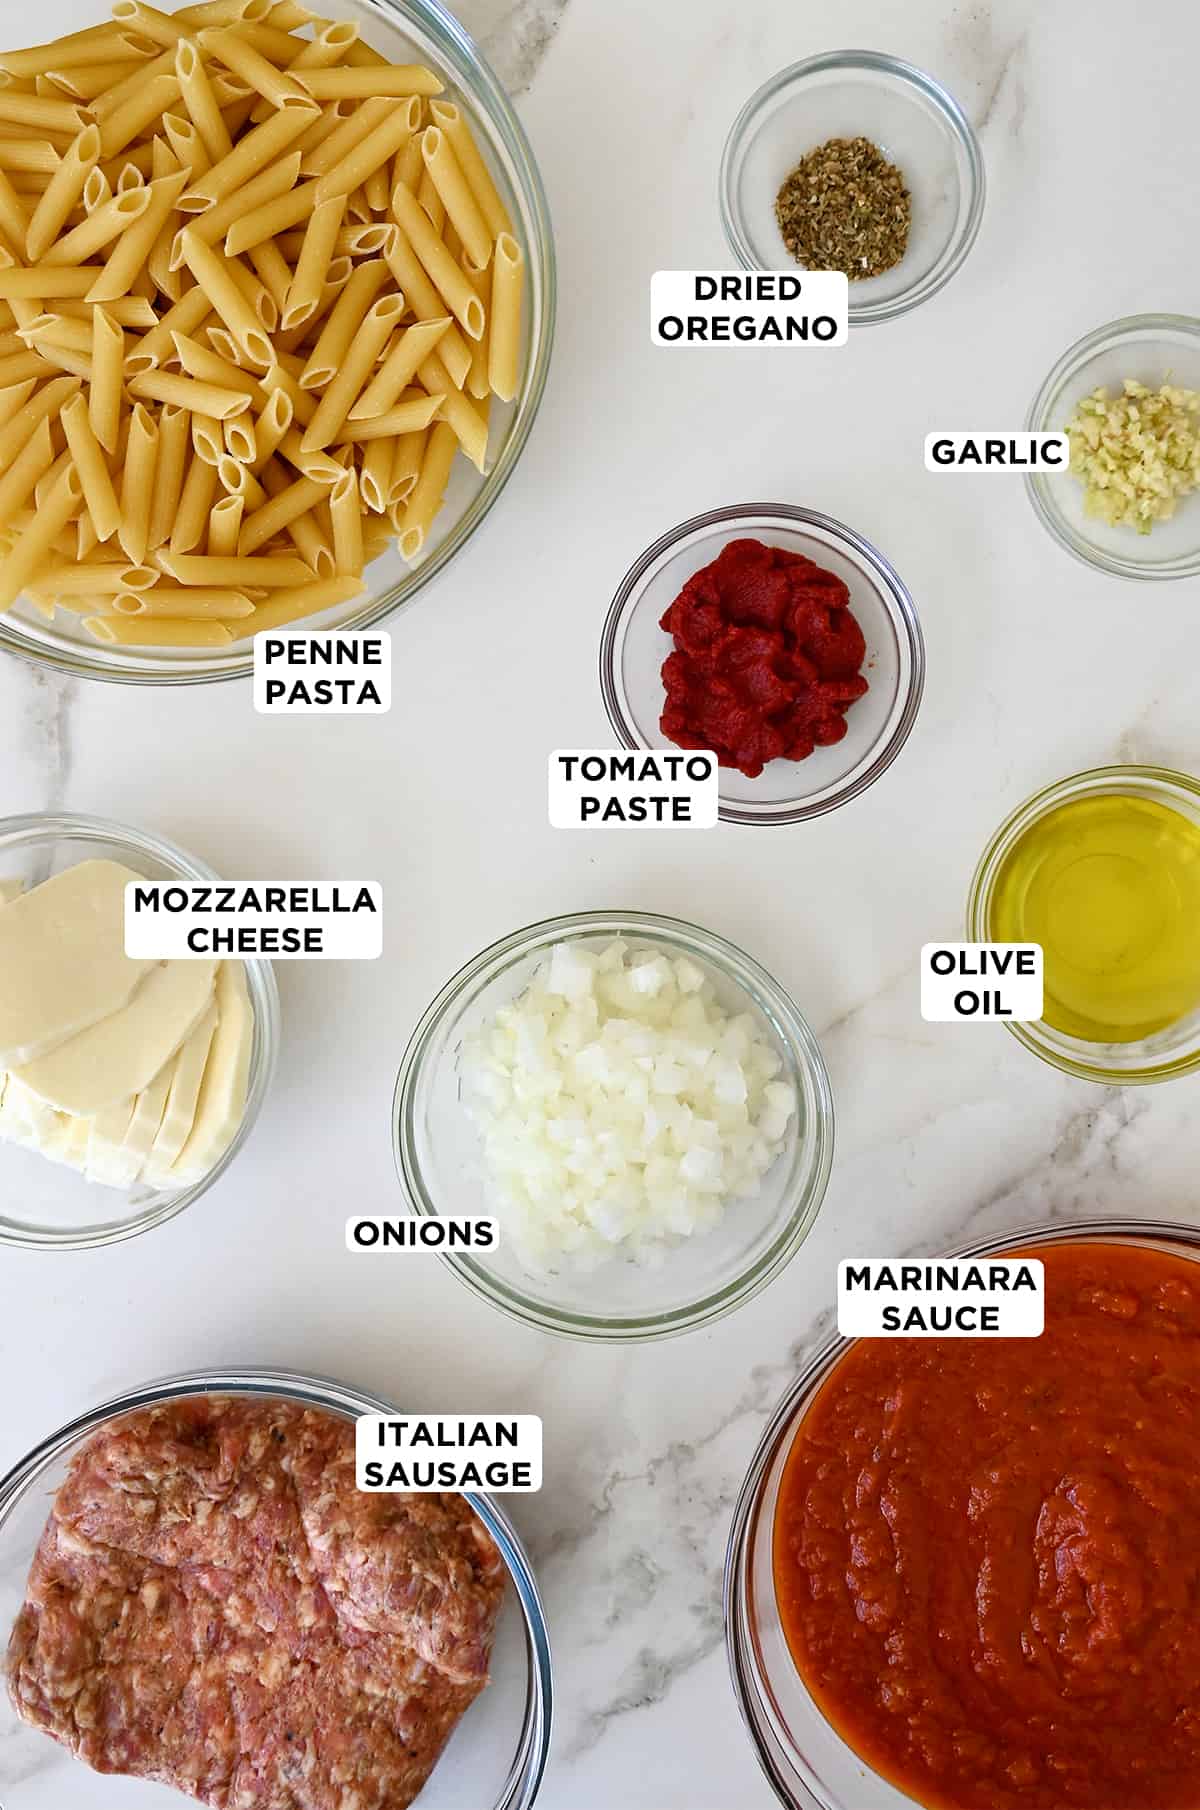 All the ingredients needed to make baked penne in clear glass bowls, including uncooked penne, dried oregano, minced garlic, tomato paste, olive oil, diced onions, marinara sauce, Italian sausage and slices of fresh mozzarella cheese.